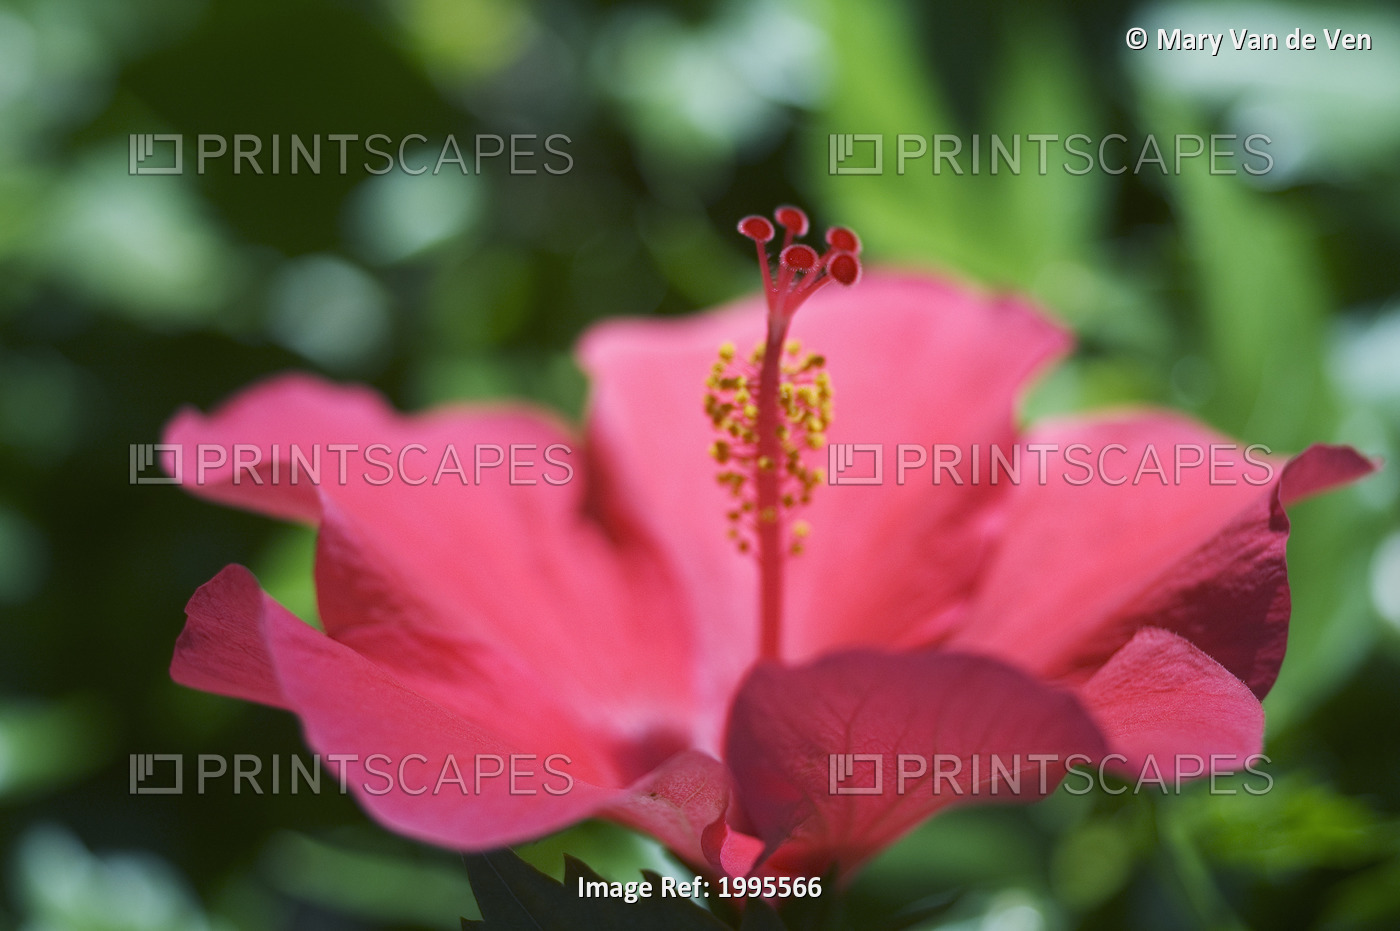 Close-Up Of Beautiful Bright Pink Hibiscus With Blue And Green Background